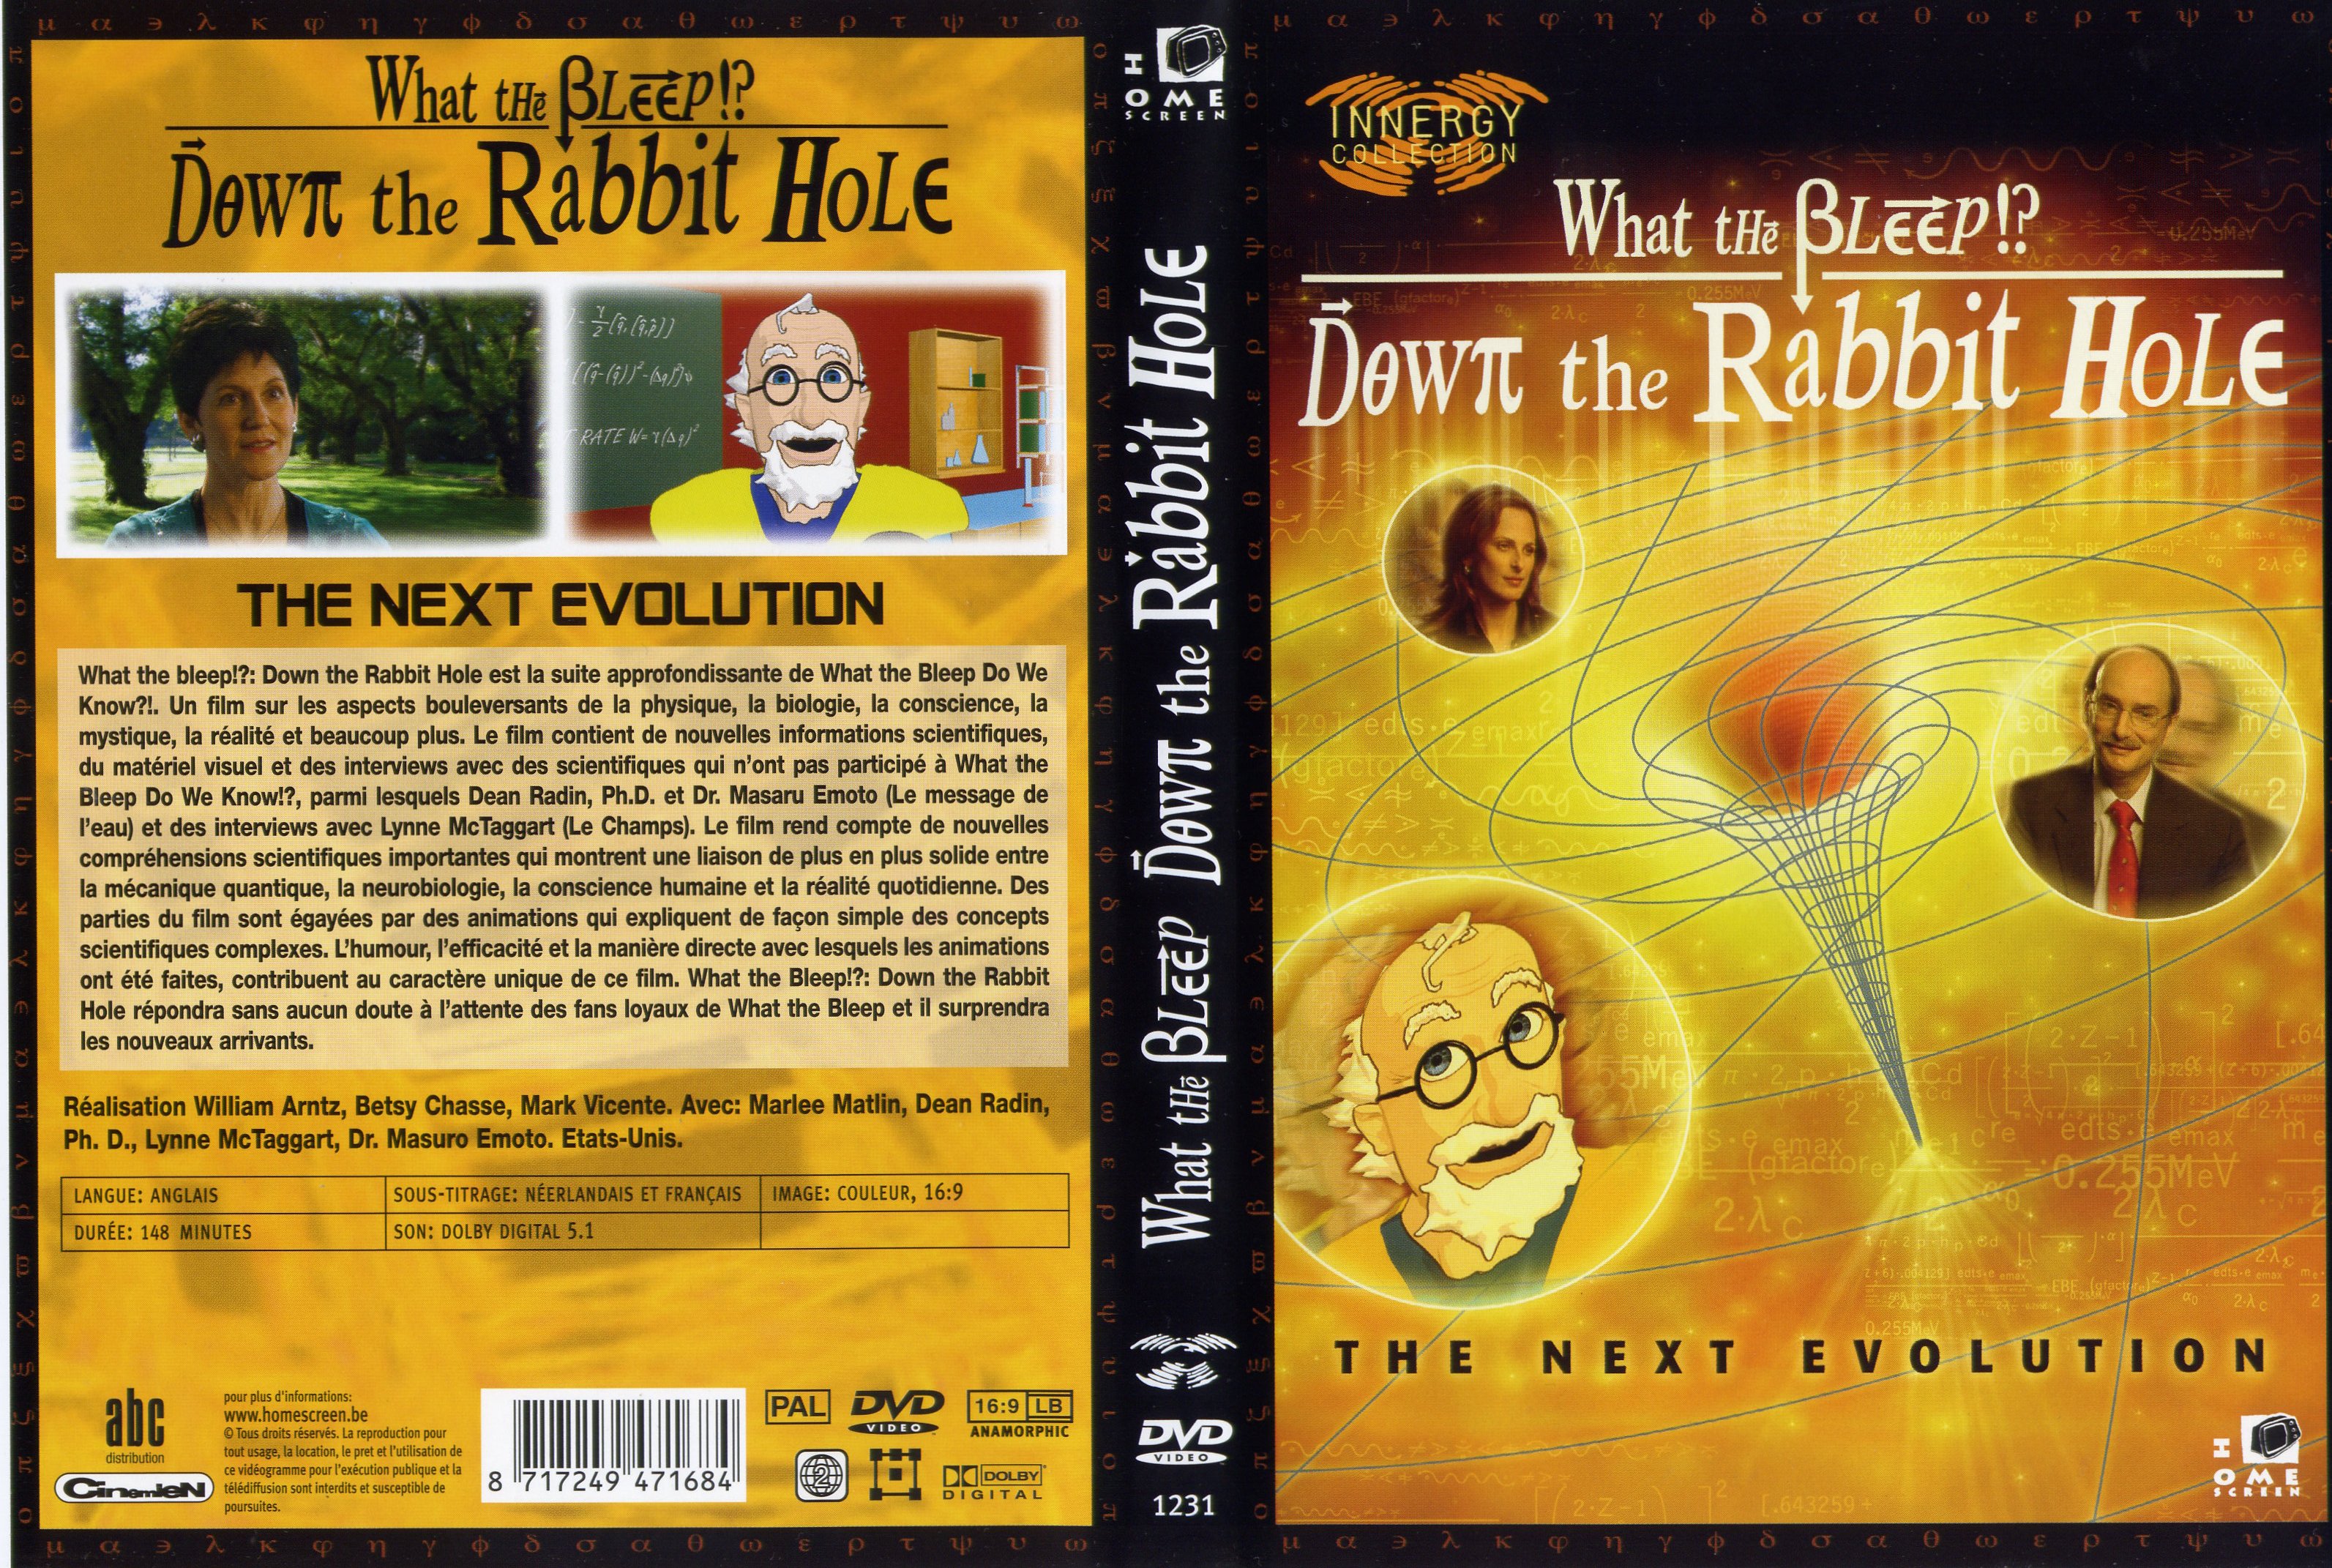 Jaquette DVD What the bleep down the rabbit hole